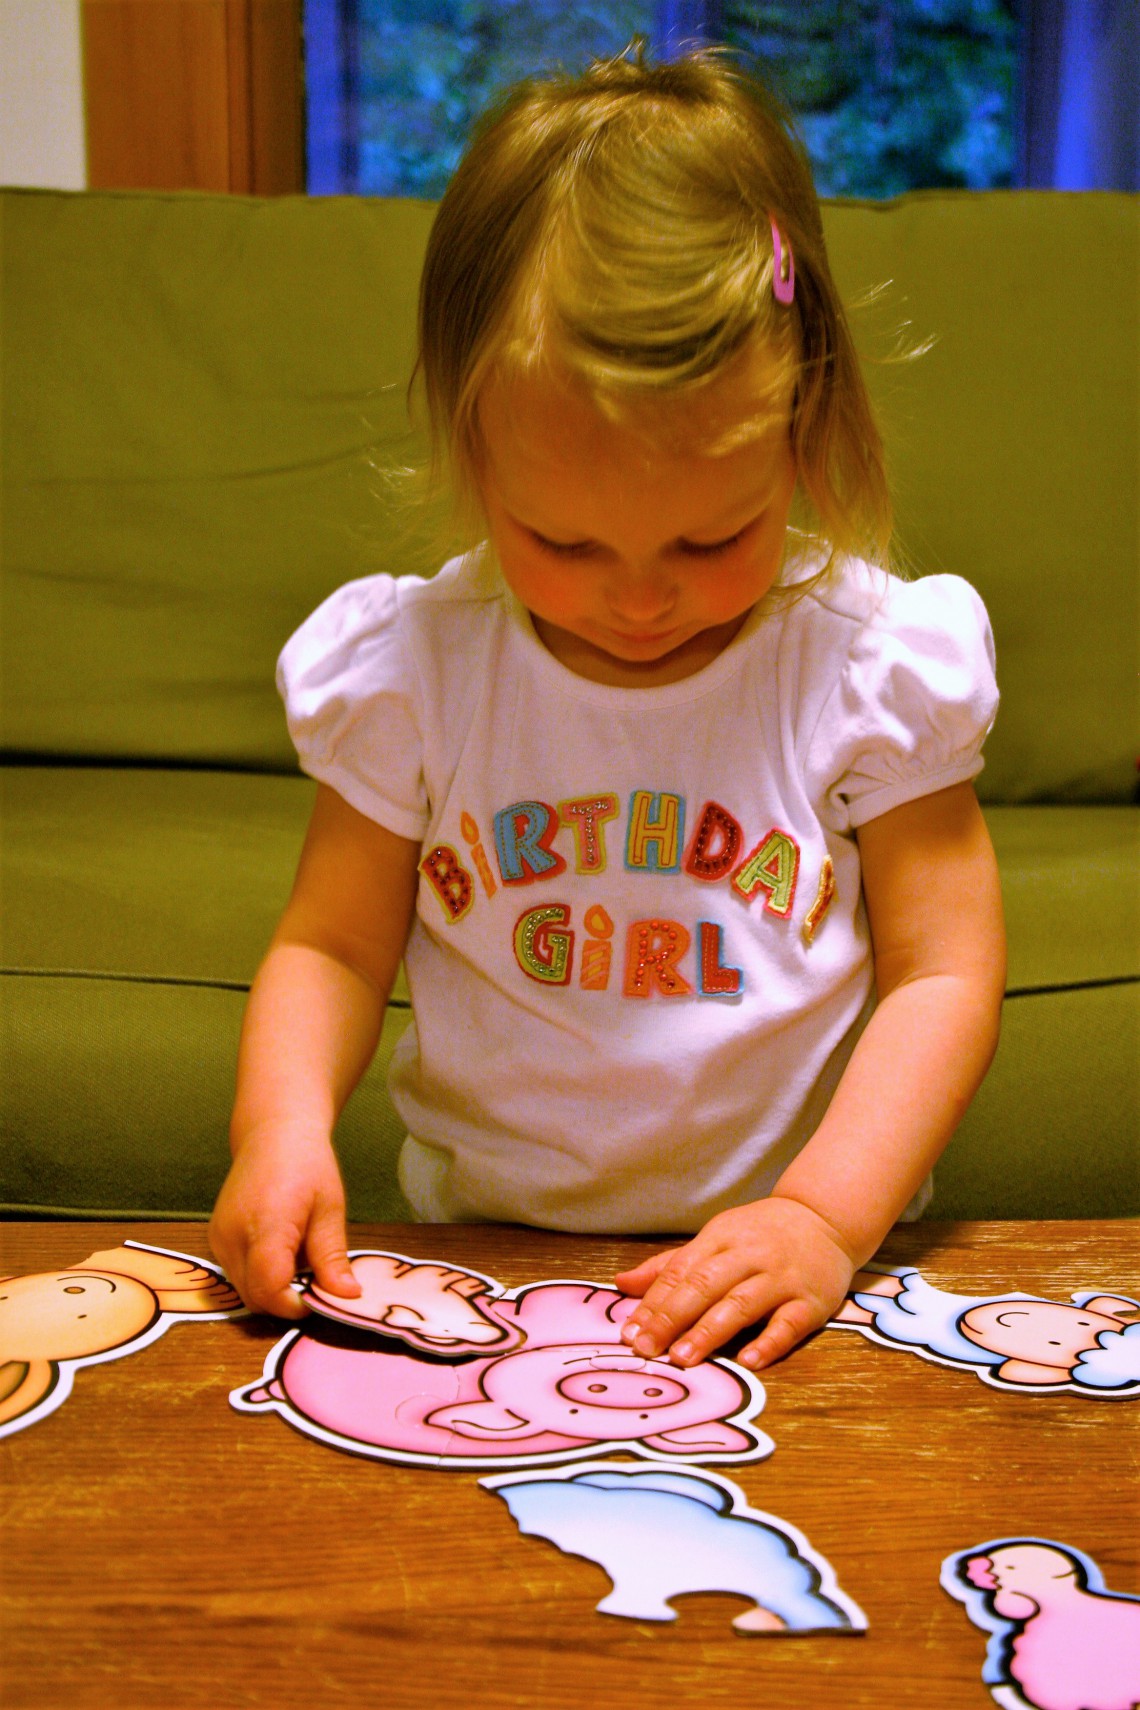 inset puzzles for babies